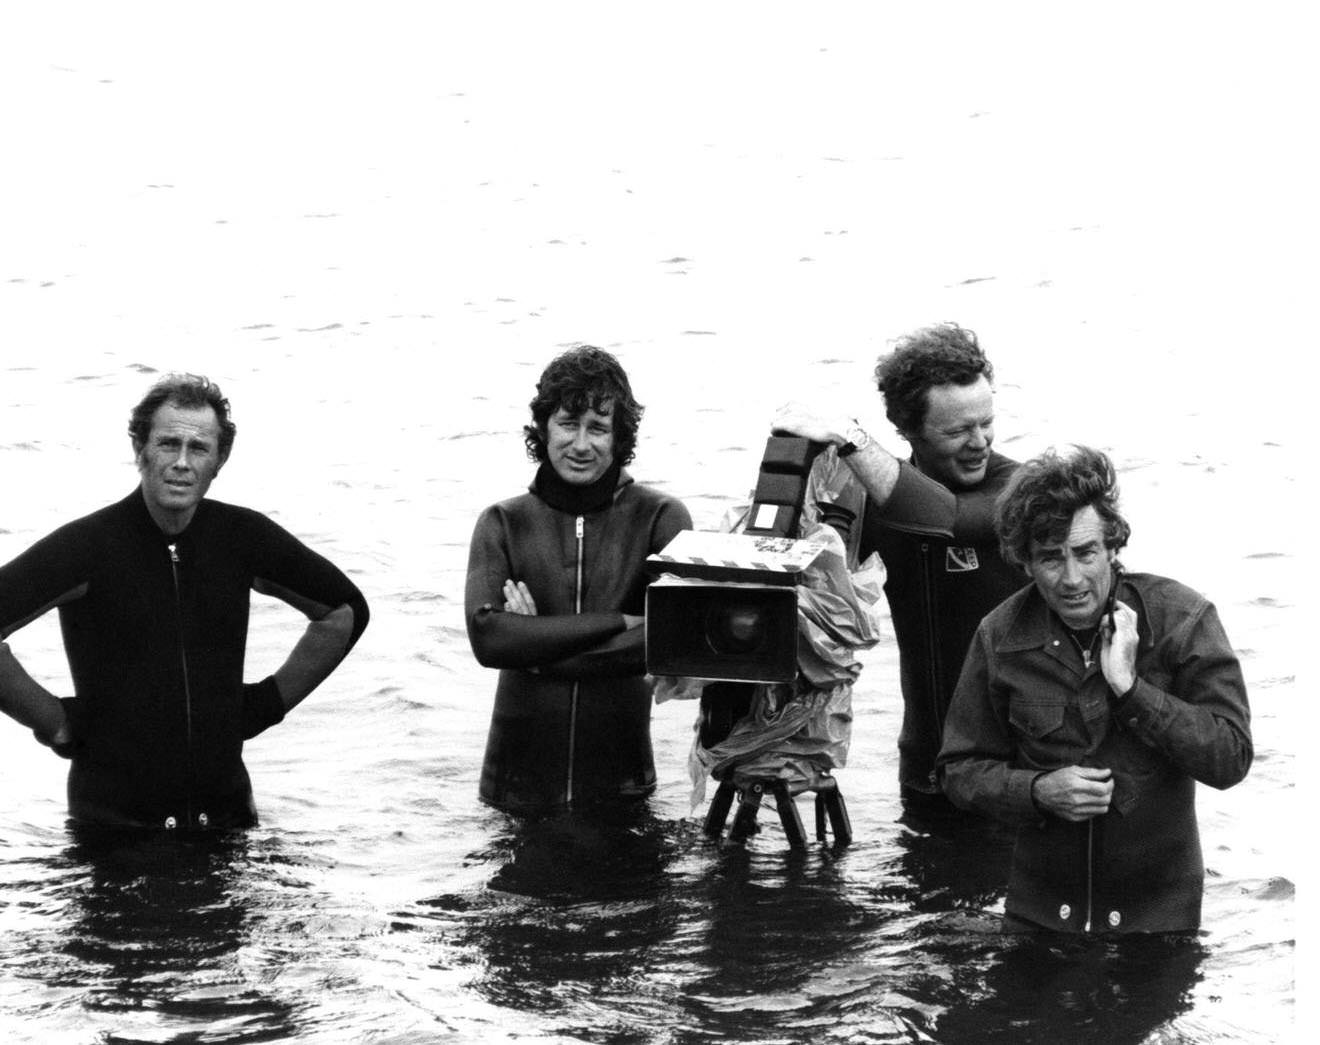 Martha's Vineyard with Director Steven Spielberg, camera operator Michael Chapman and cinematographer Bill Butler on the set of 'Jaws' in 1975 in Martha's Vineyard, Massachusetts.